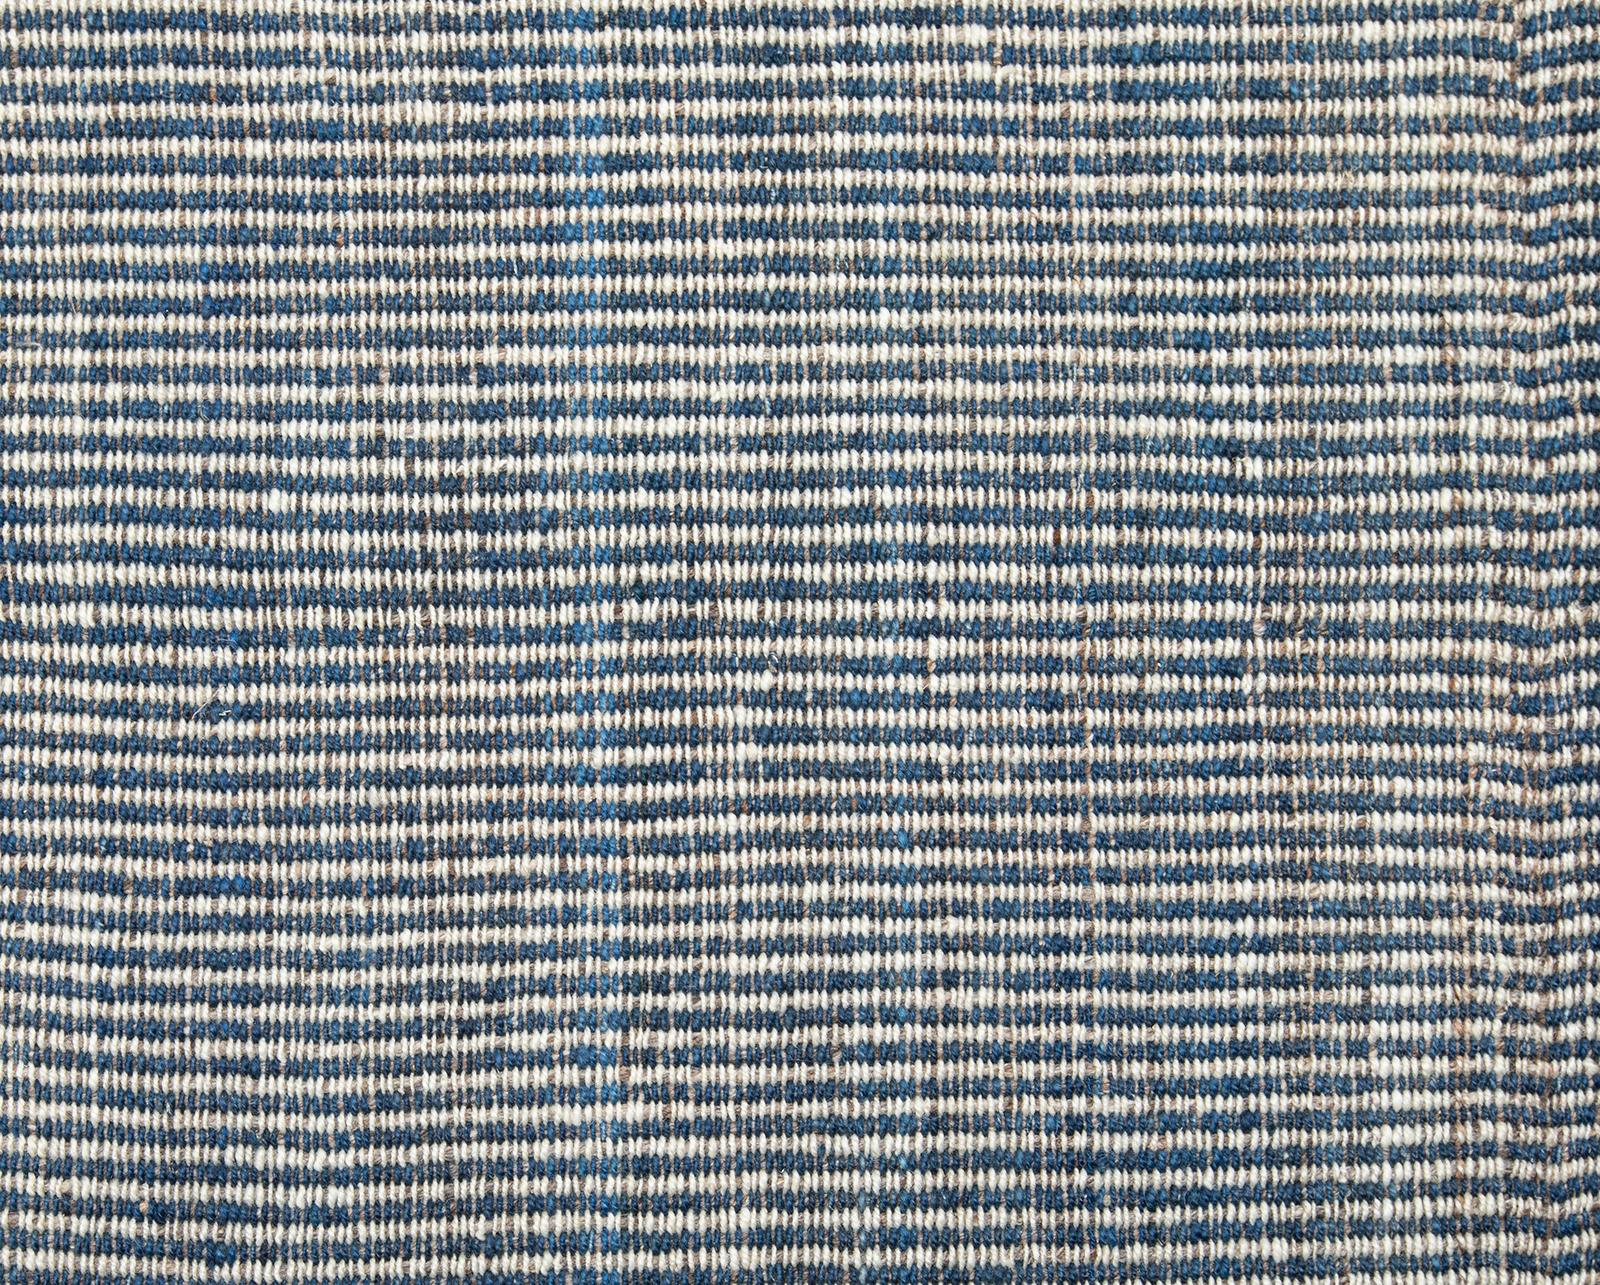 Hand-Woven Pelas Handwoven Flatweave Textured Pattern Rug in Blue and Beige Color For Sale